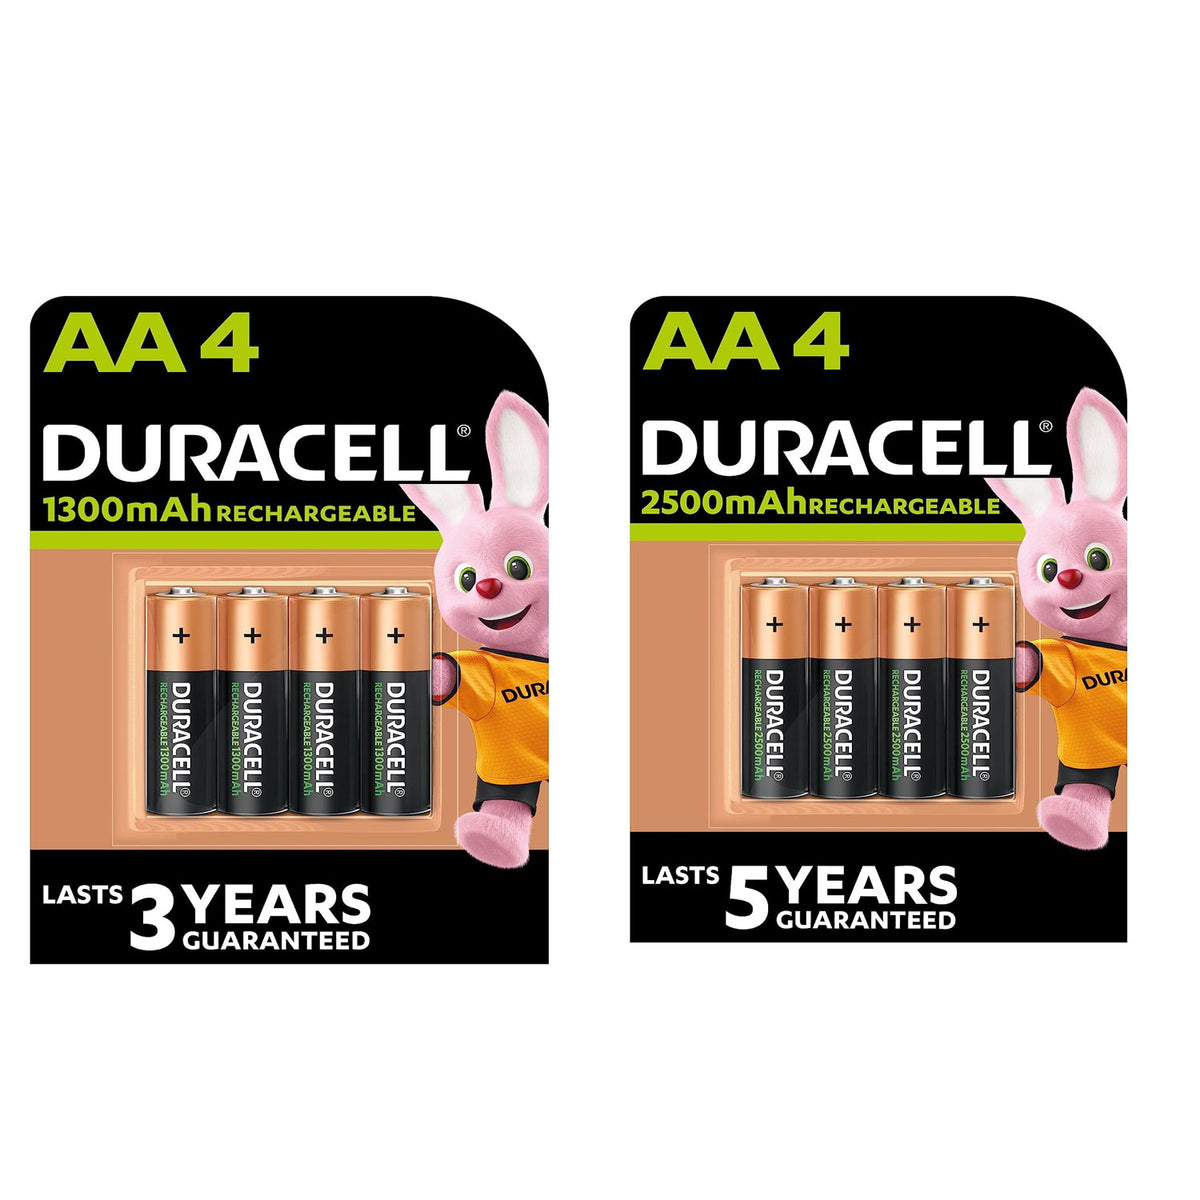 DURACELL NiMH 1.5V 2400mAh AA Rechargeable Battery, 4-pack